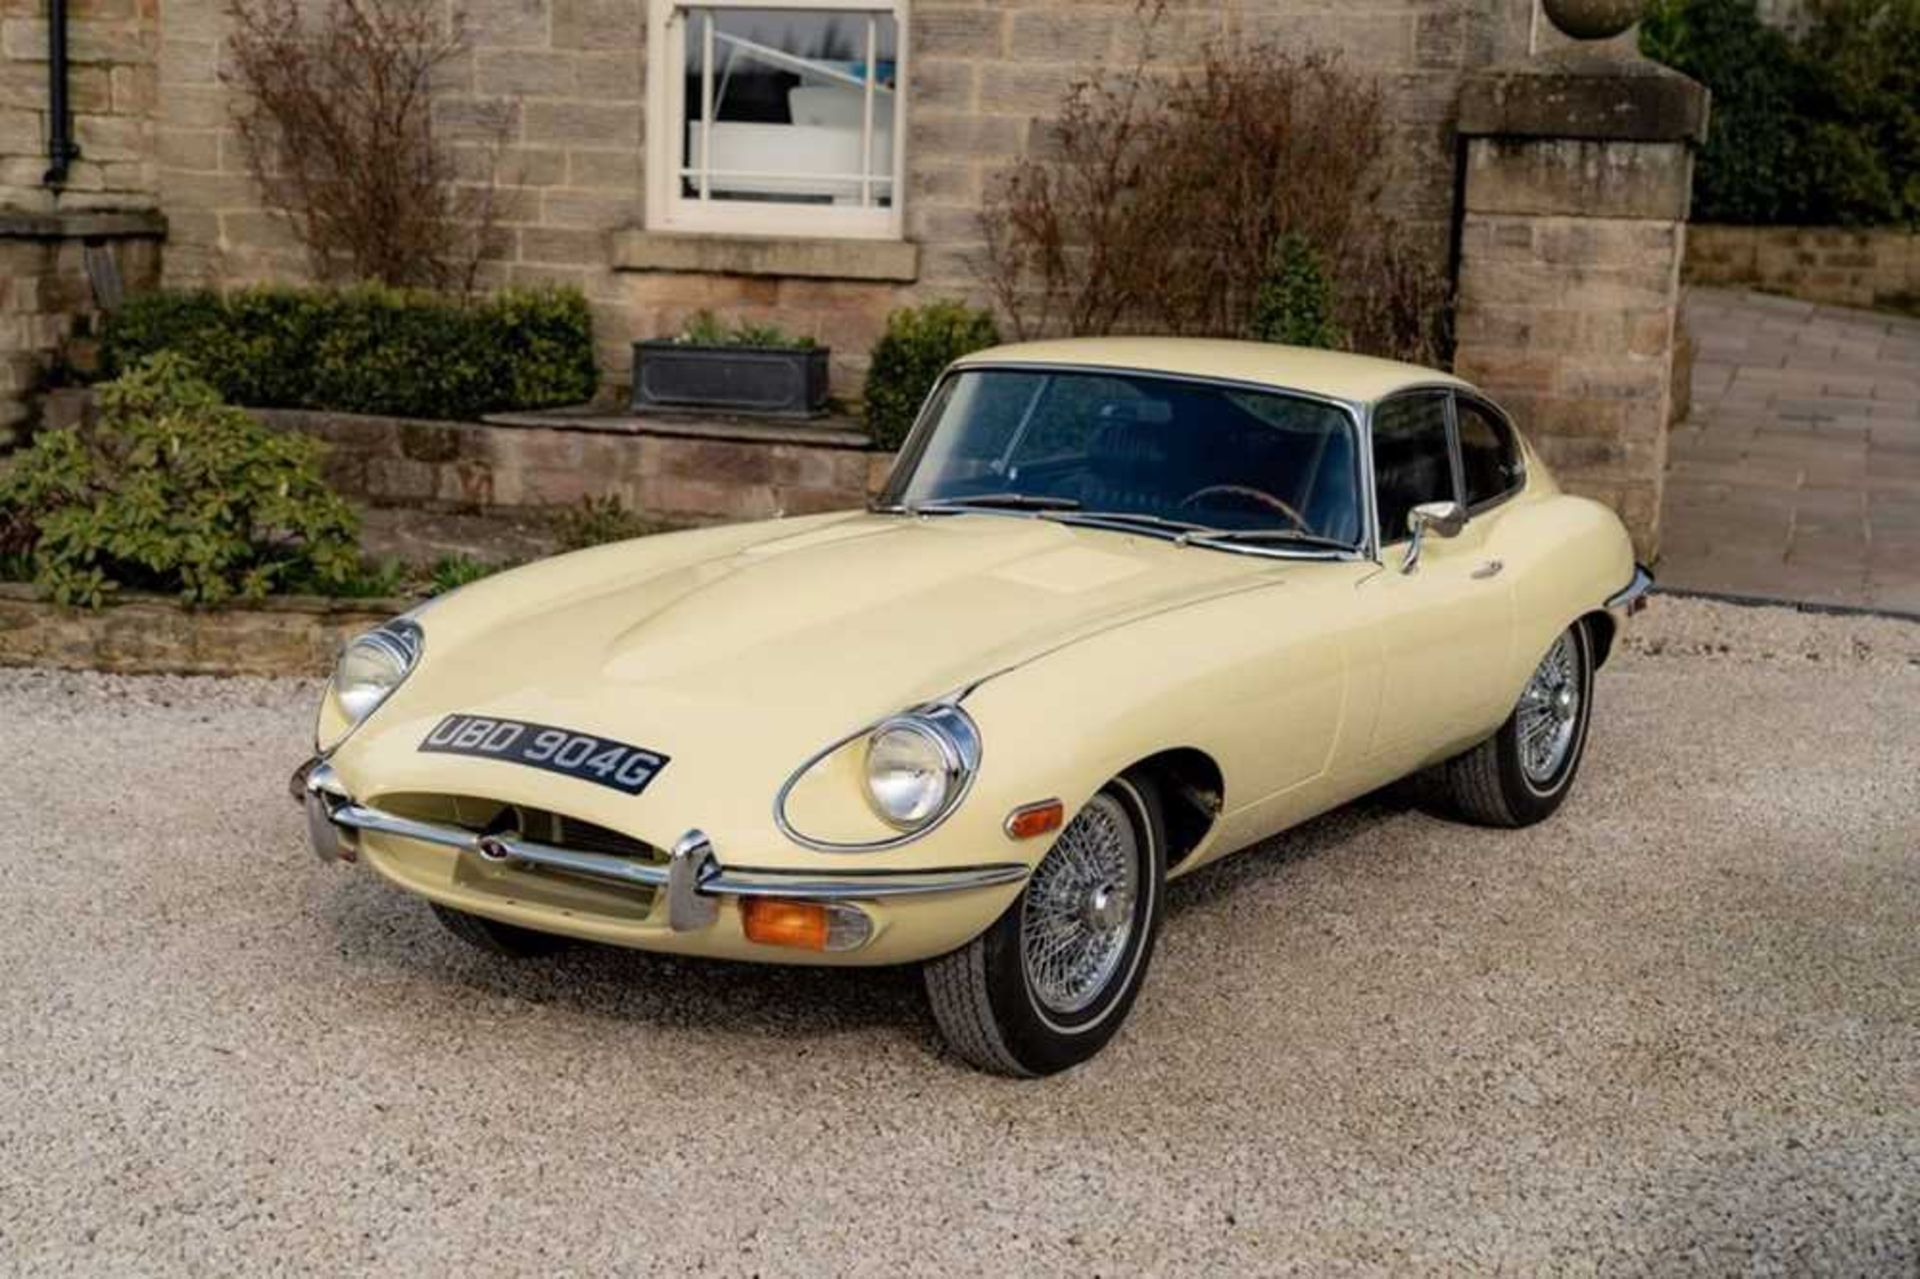 1968 Jaguar E-Type 4.2 Litre Coupe Genuine 44,000 miles from new - Image 29 of 68